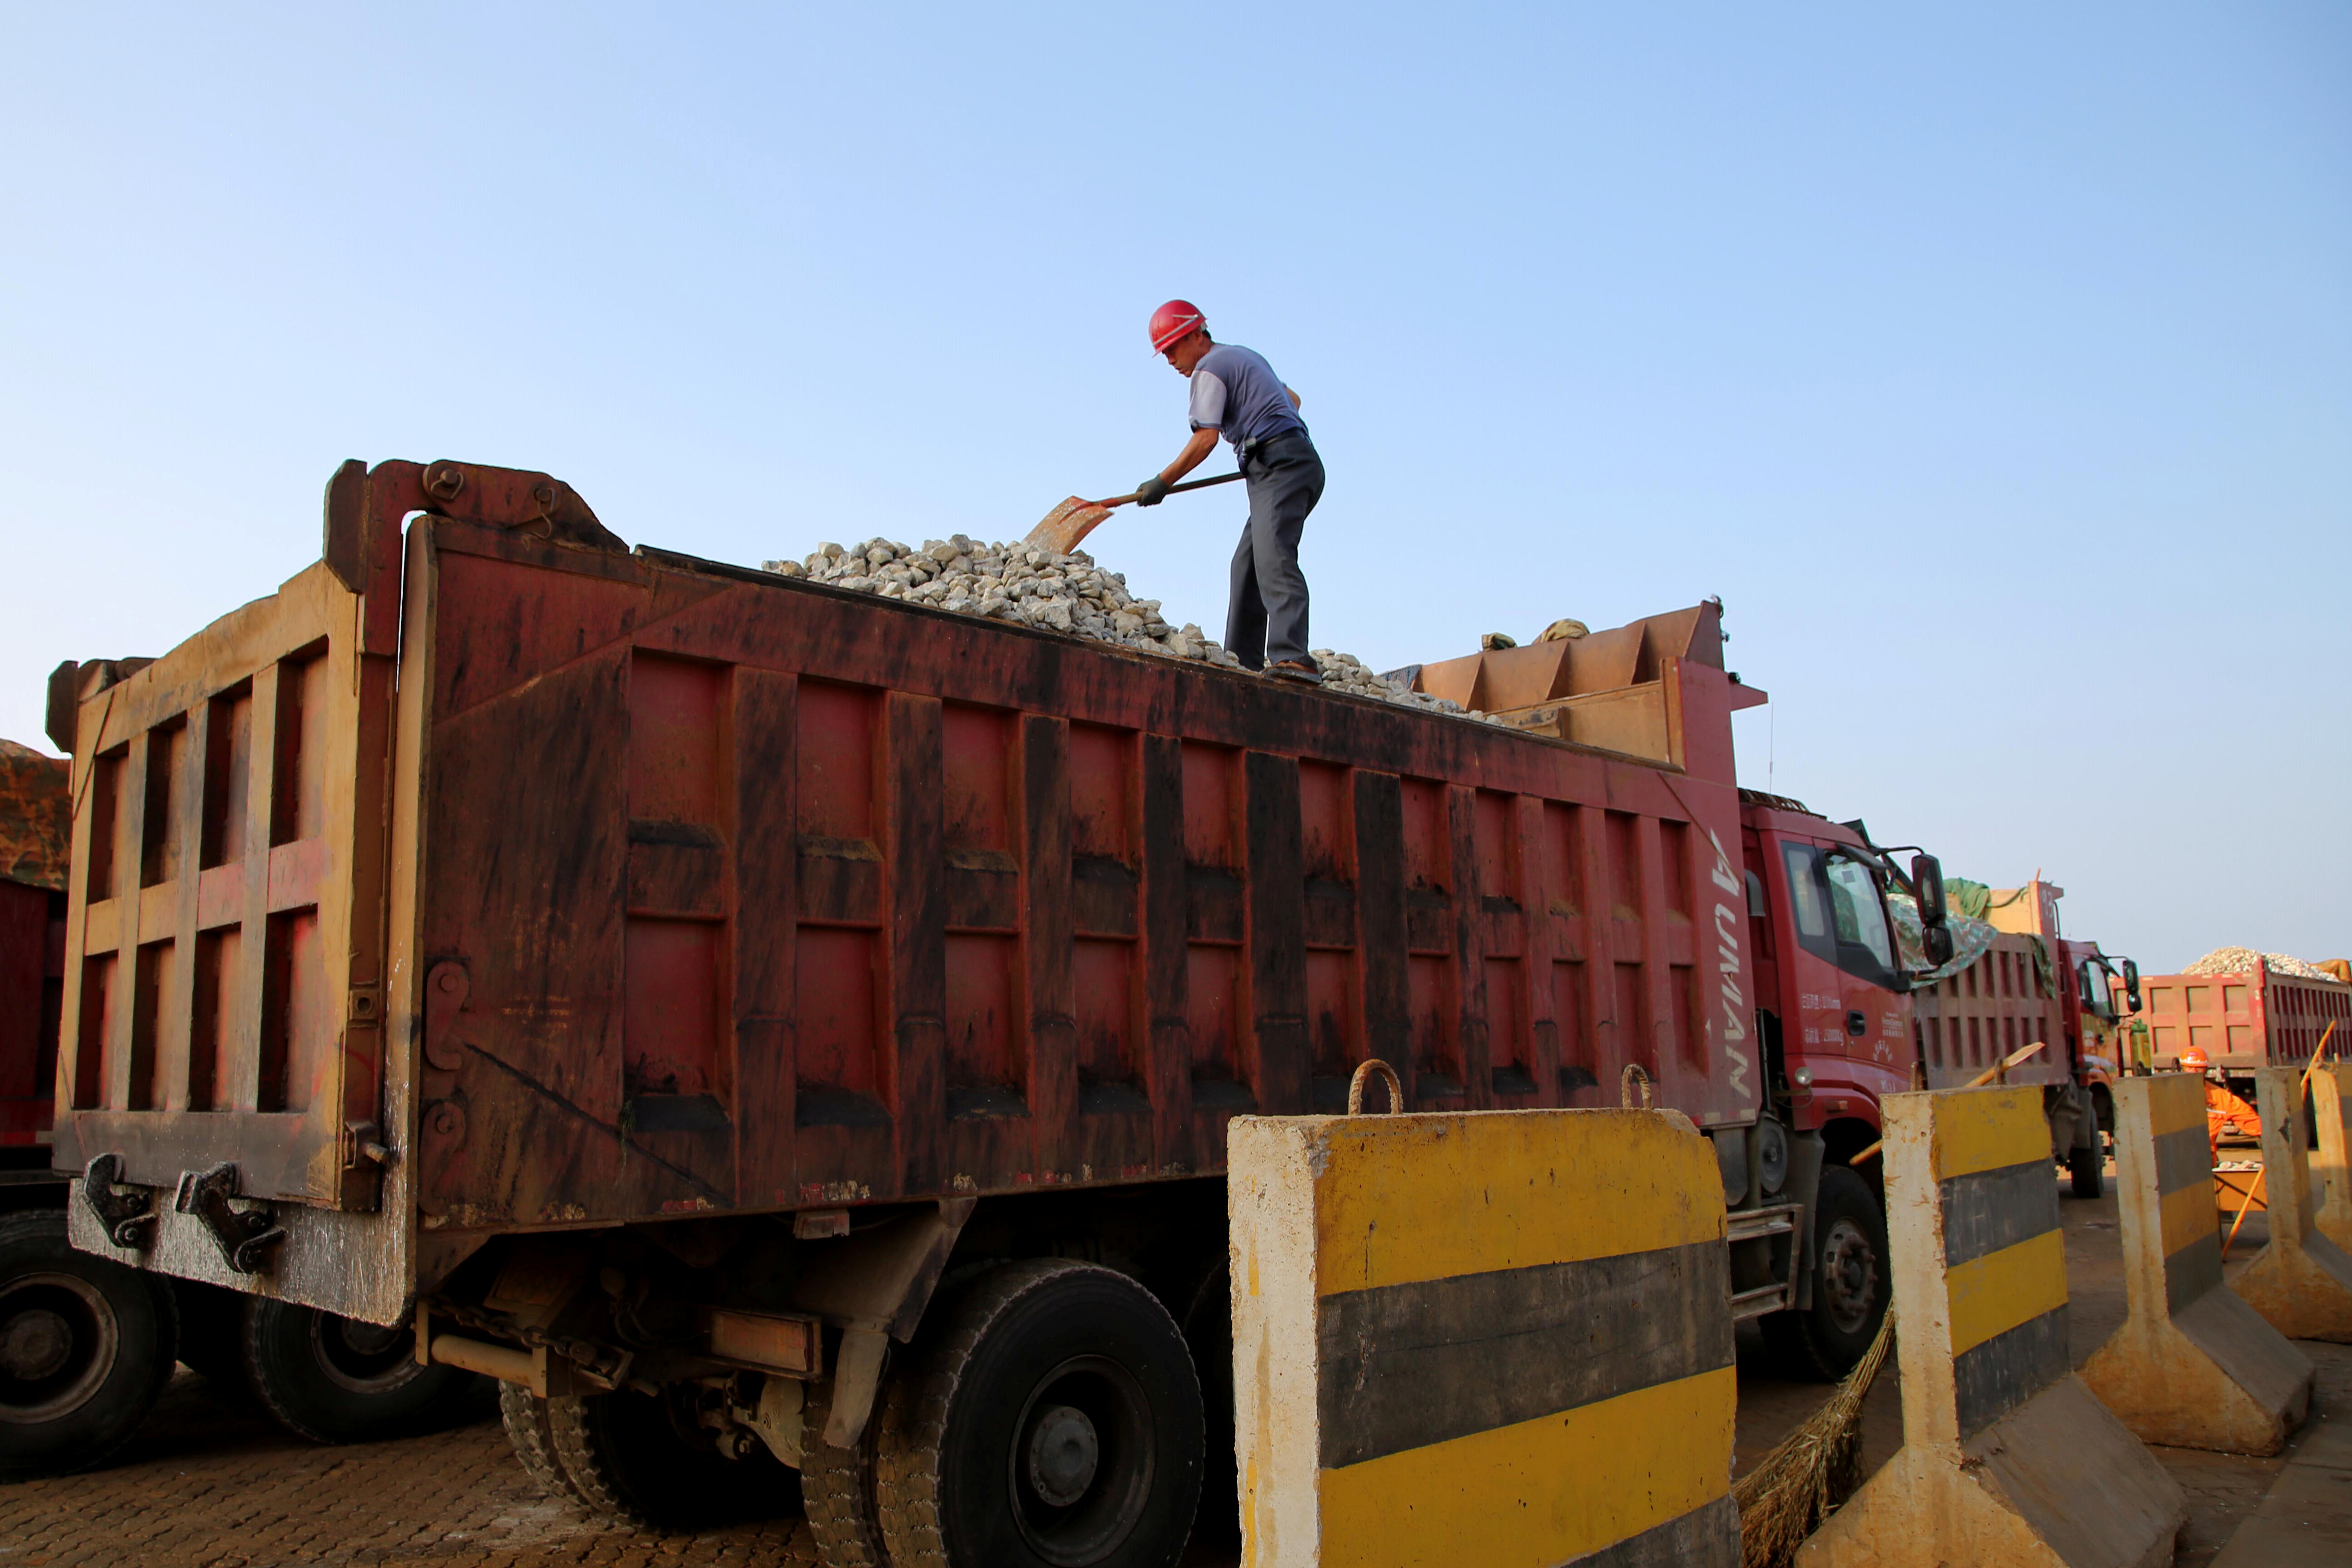 A man works on transporting iron ore on a truck at Ganyu port in Lianyungang